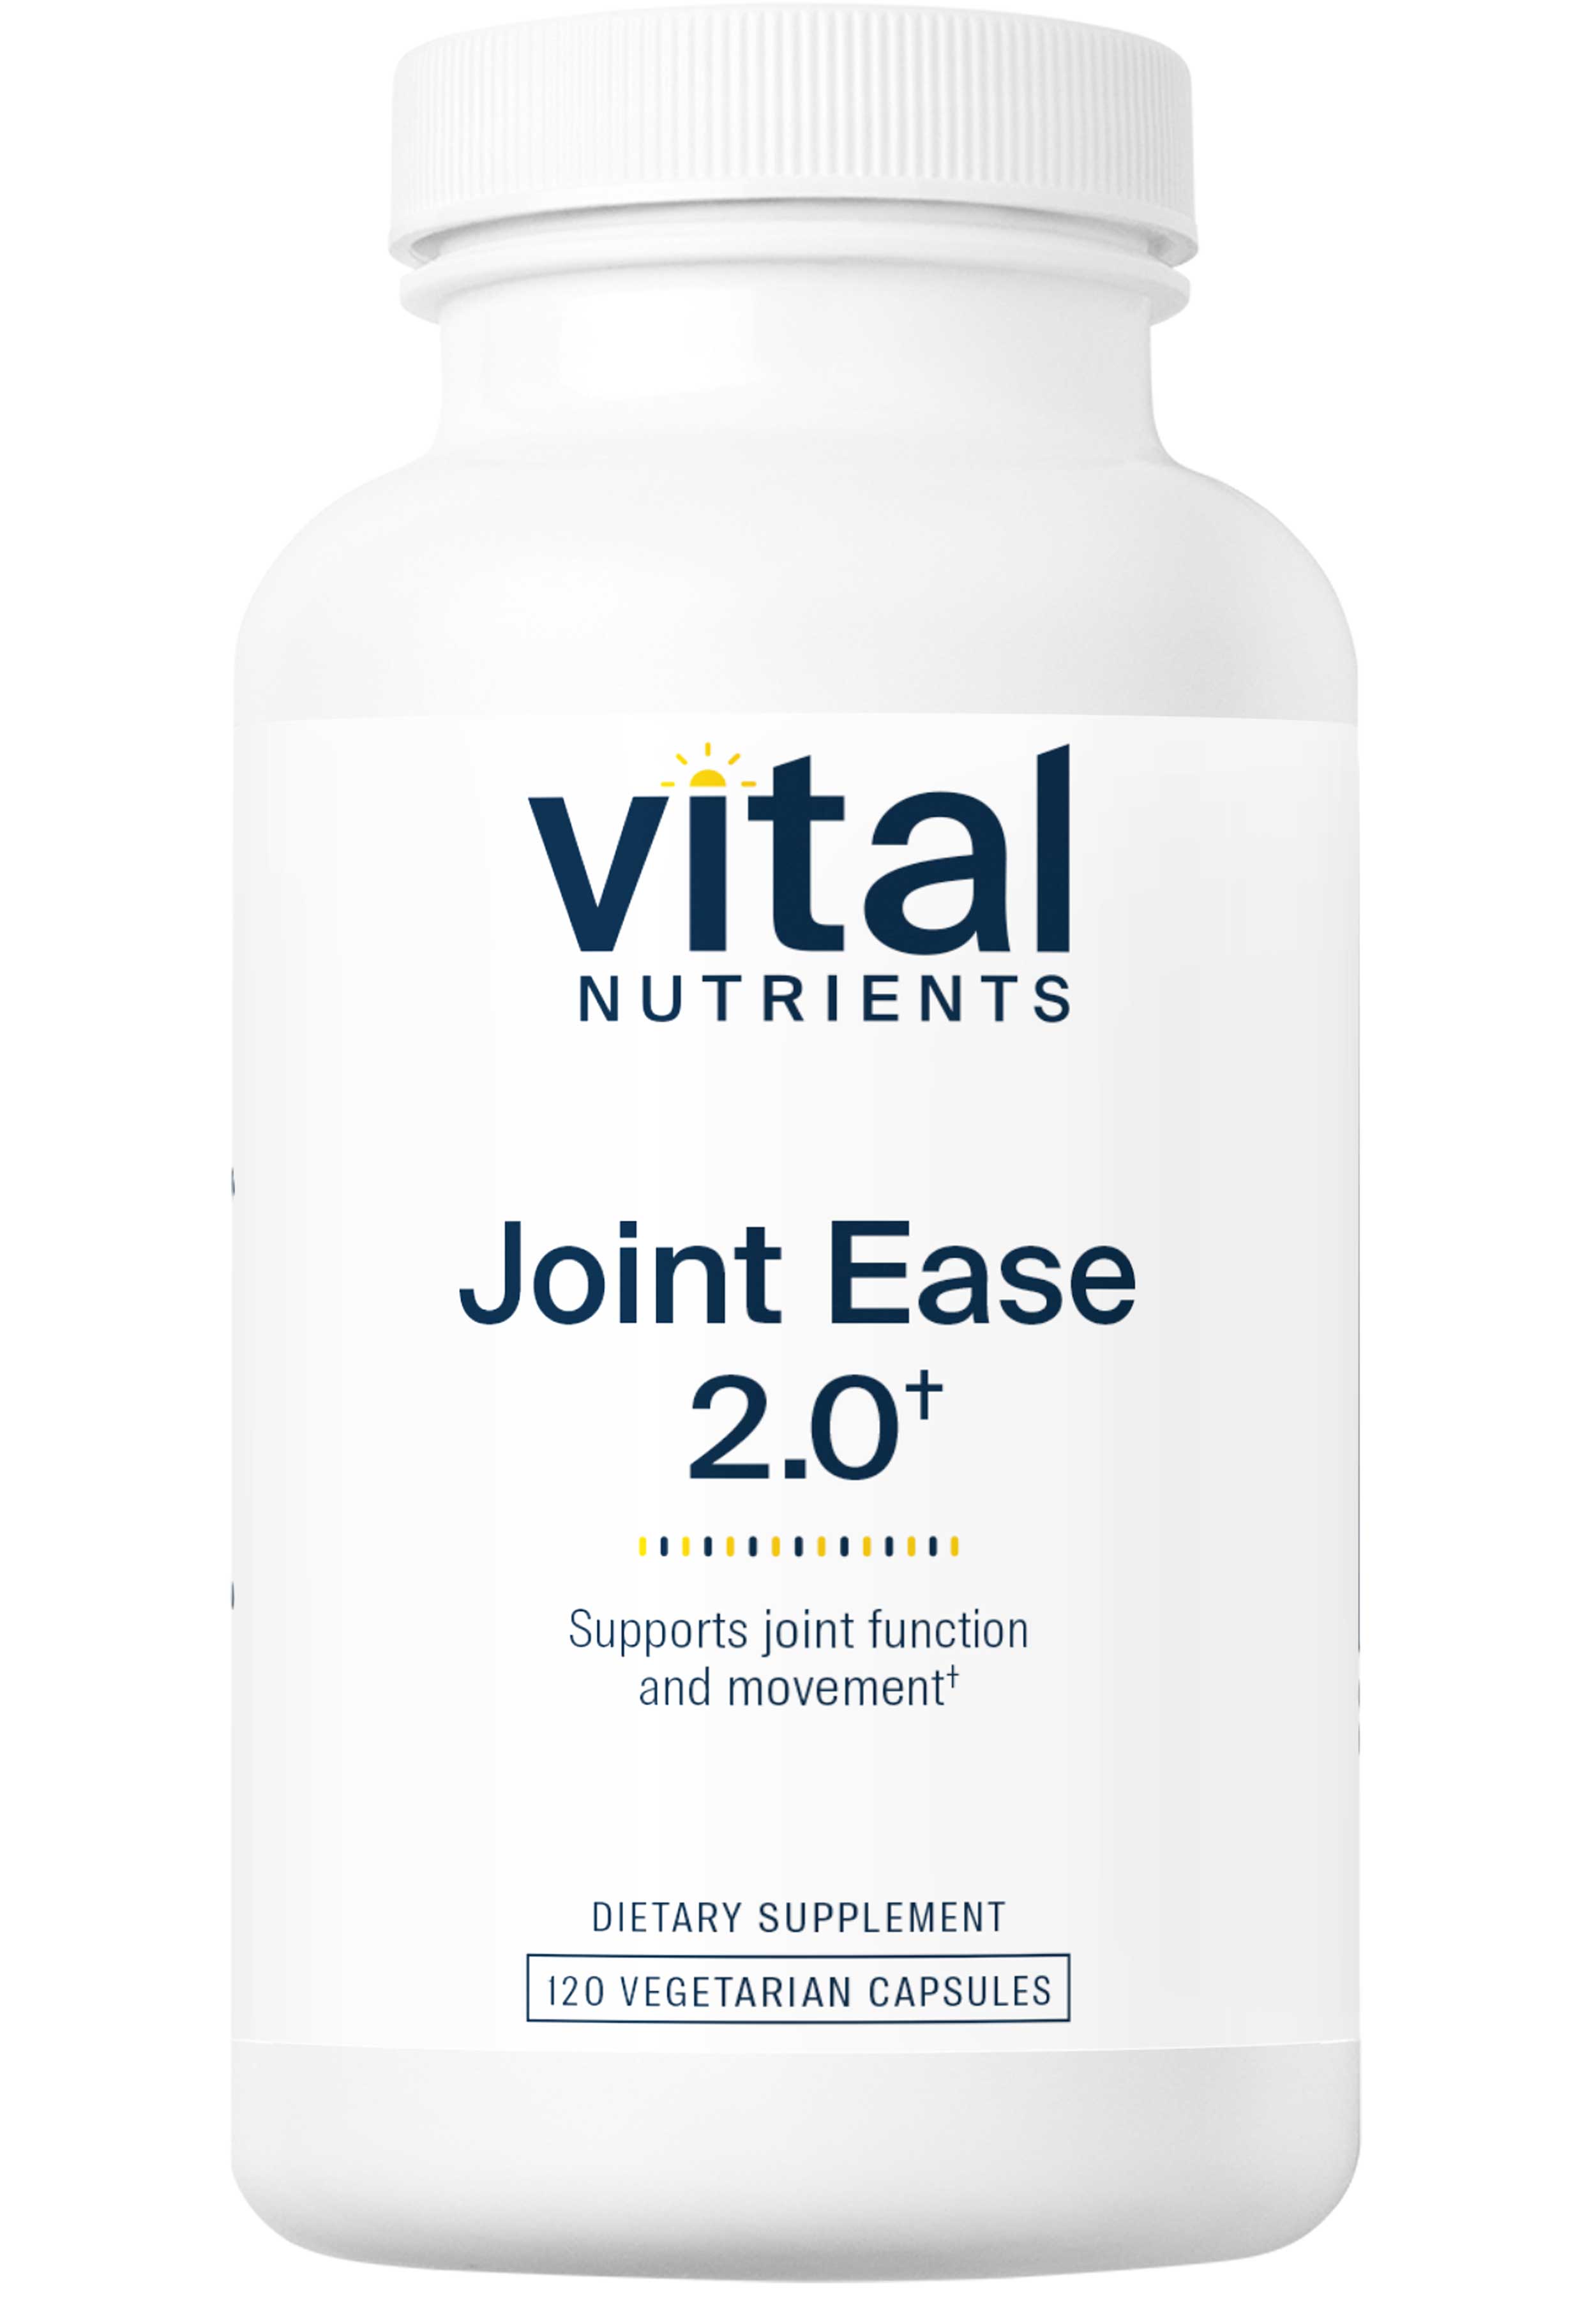 Vital Nutrients Joint Ease 2.0